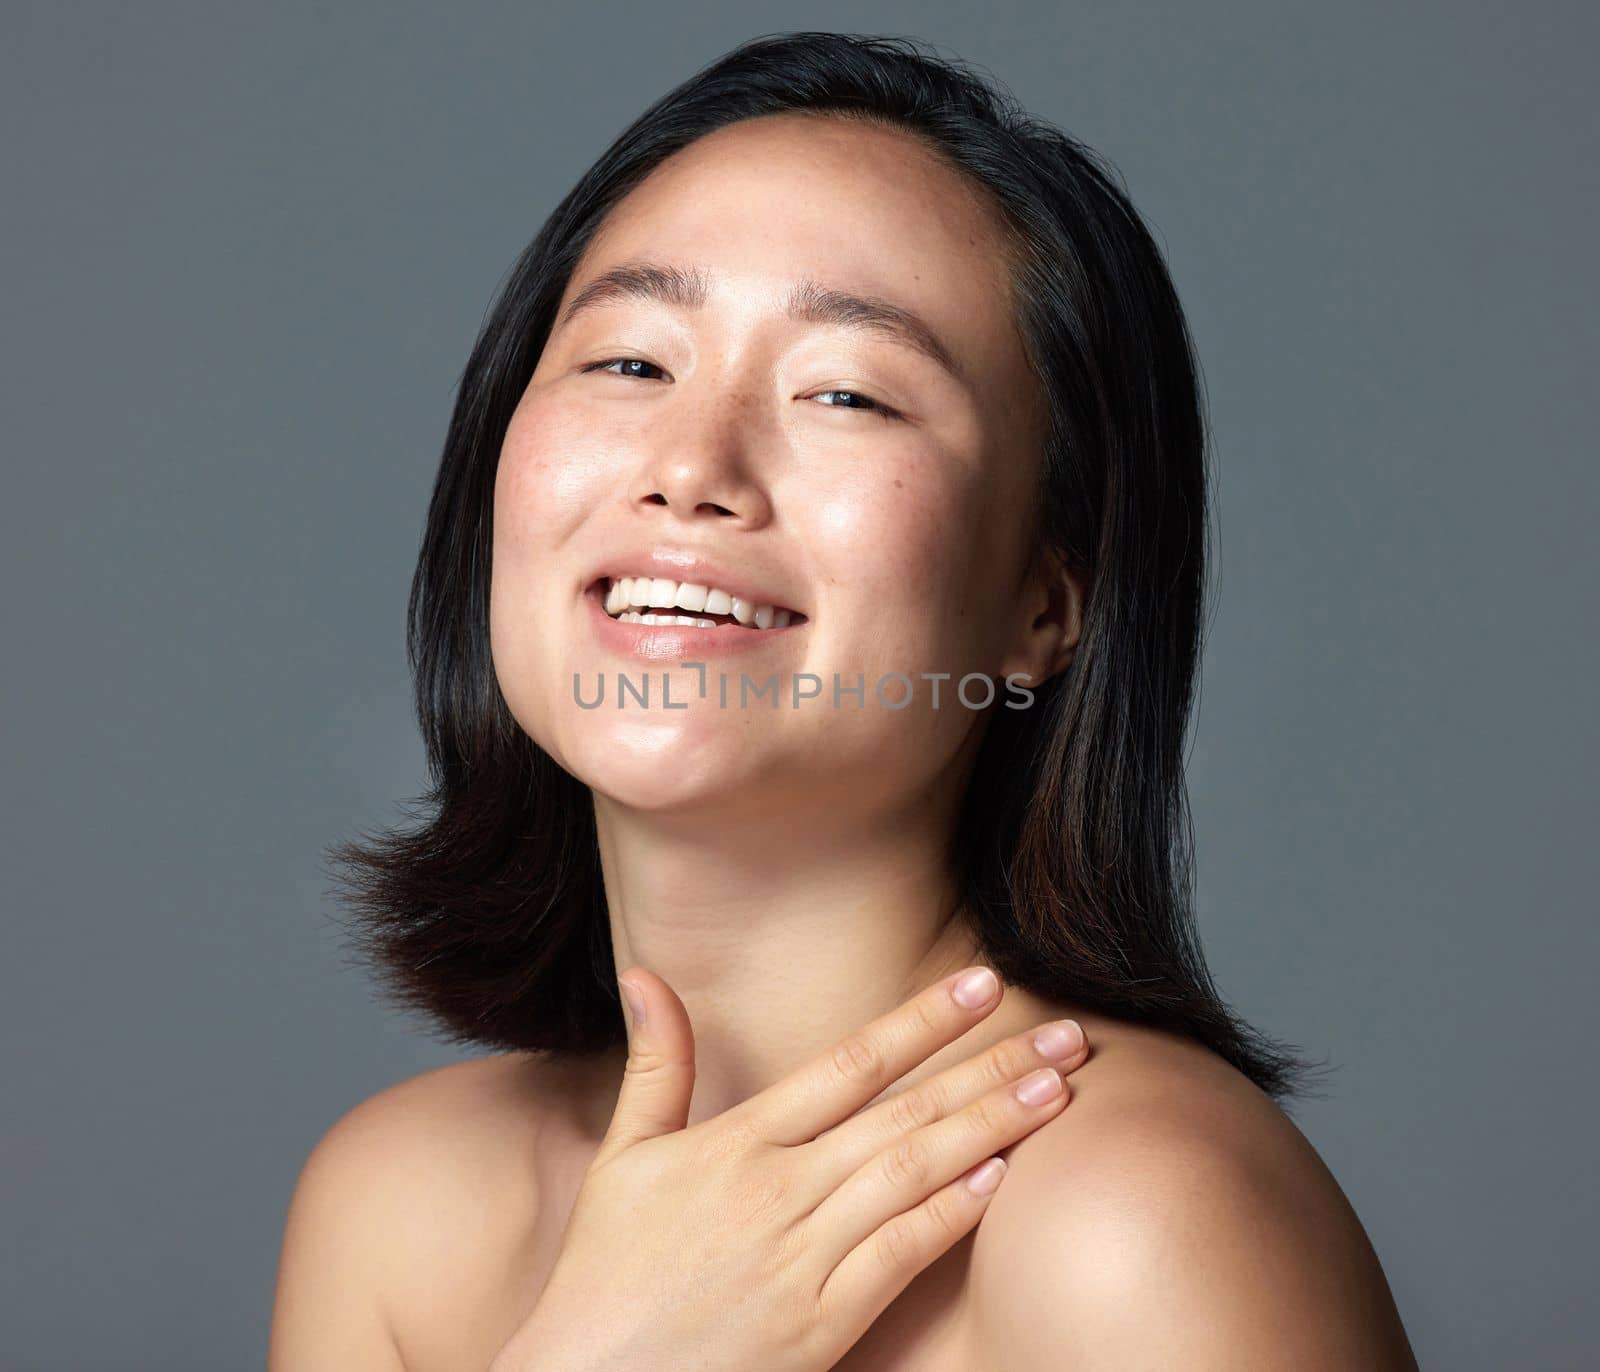 This lotion is by far the best Ive used. Studio shot of a beautiful young woman posing against a grey background